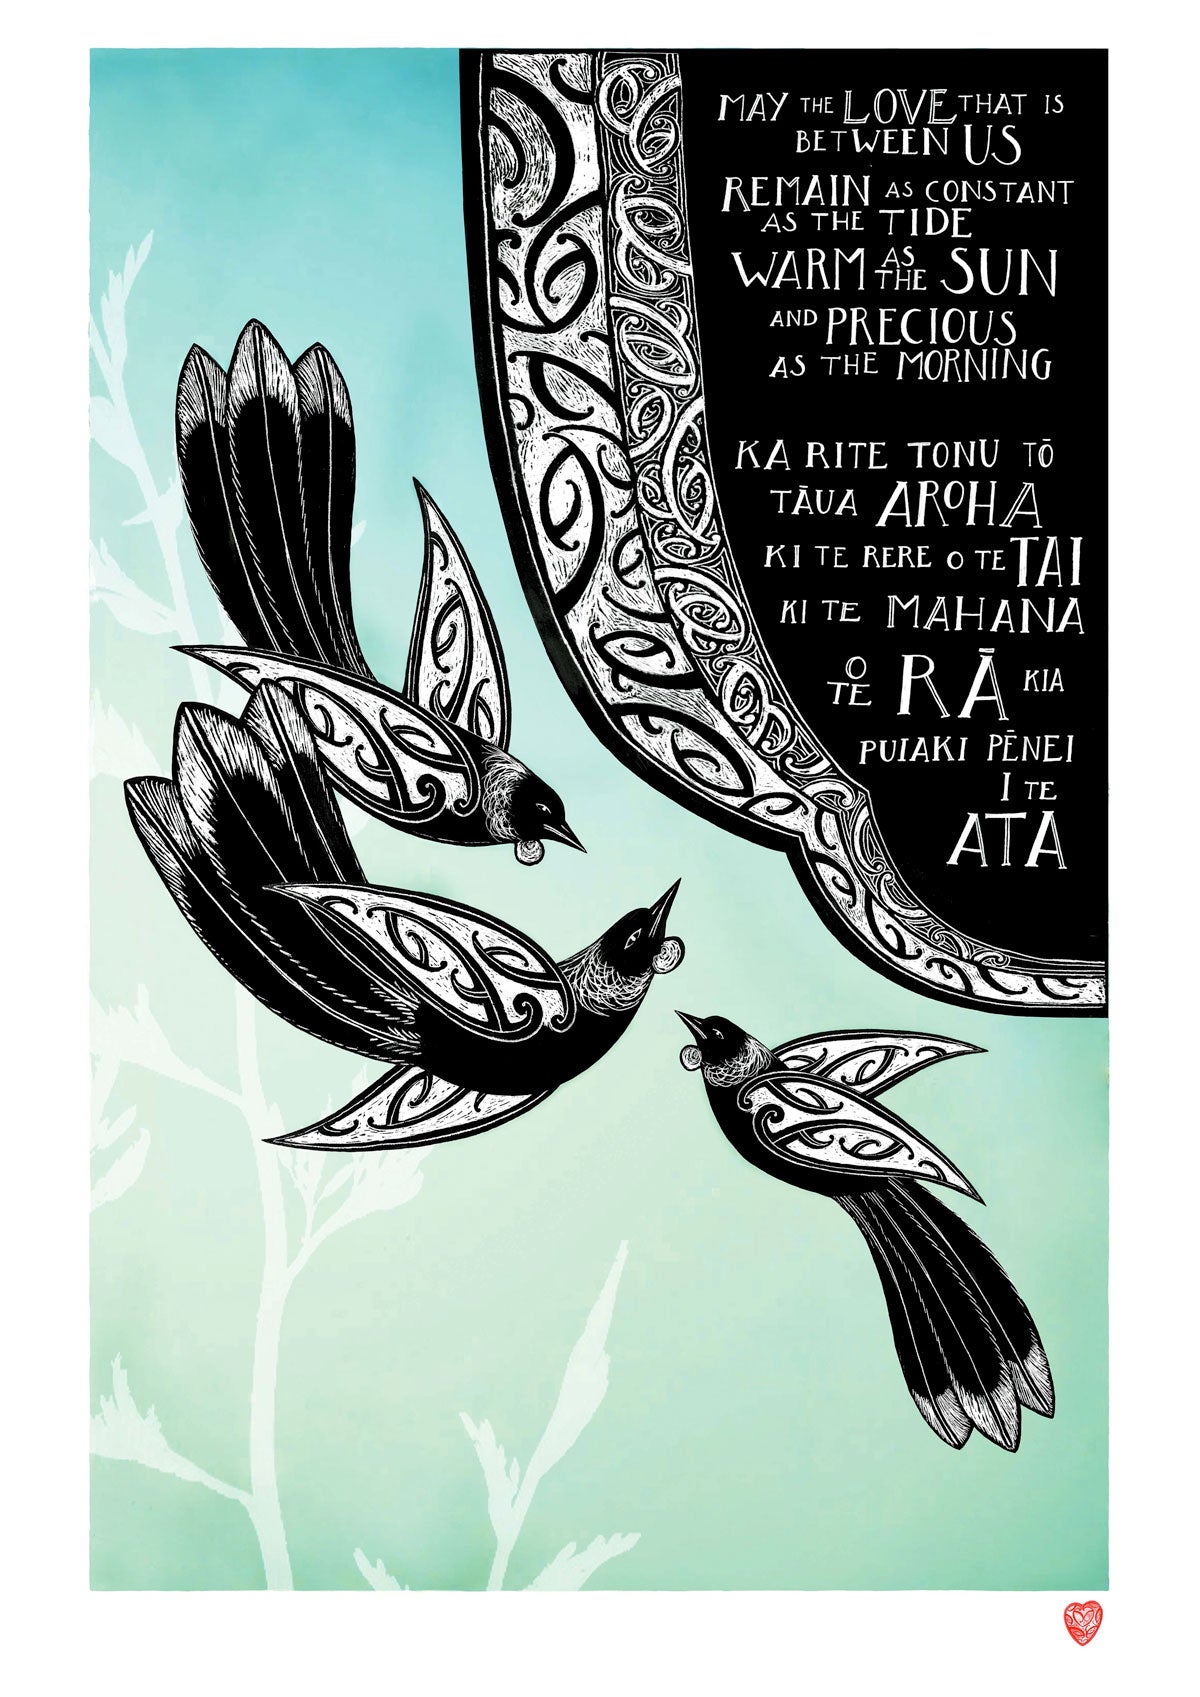 May the Love nz art print. Maori art design tui birds and the words May the love that is between us remain as constant as the tide, as warm as the sun, and as precious as the morning in te reo maori and english translation. A blessing karakia print by Amber Smith New Zealand artist